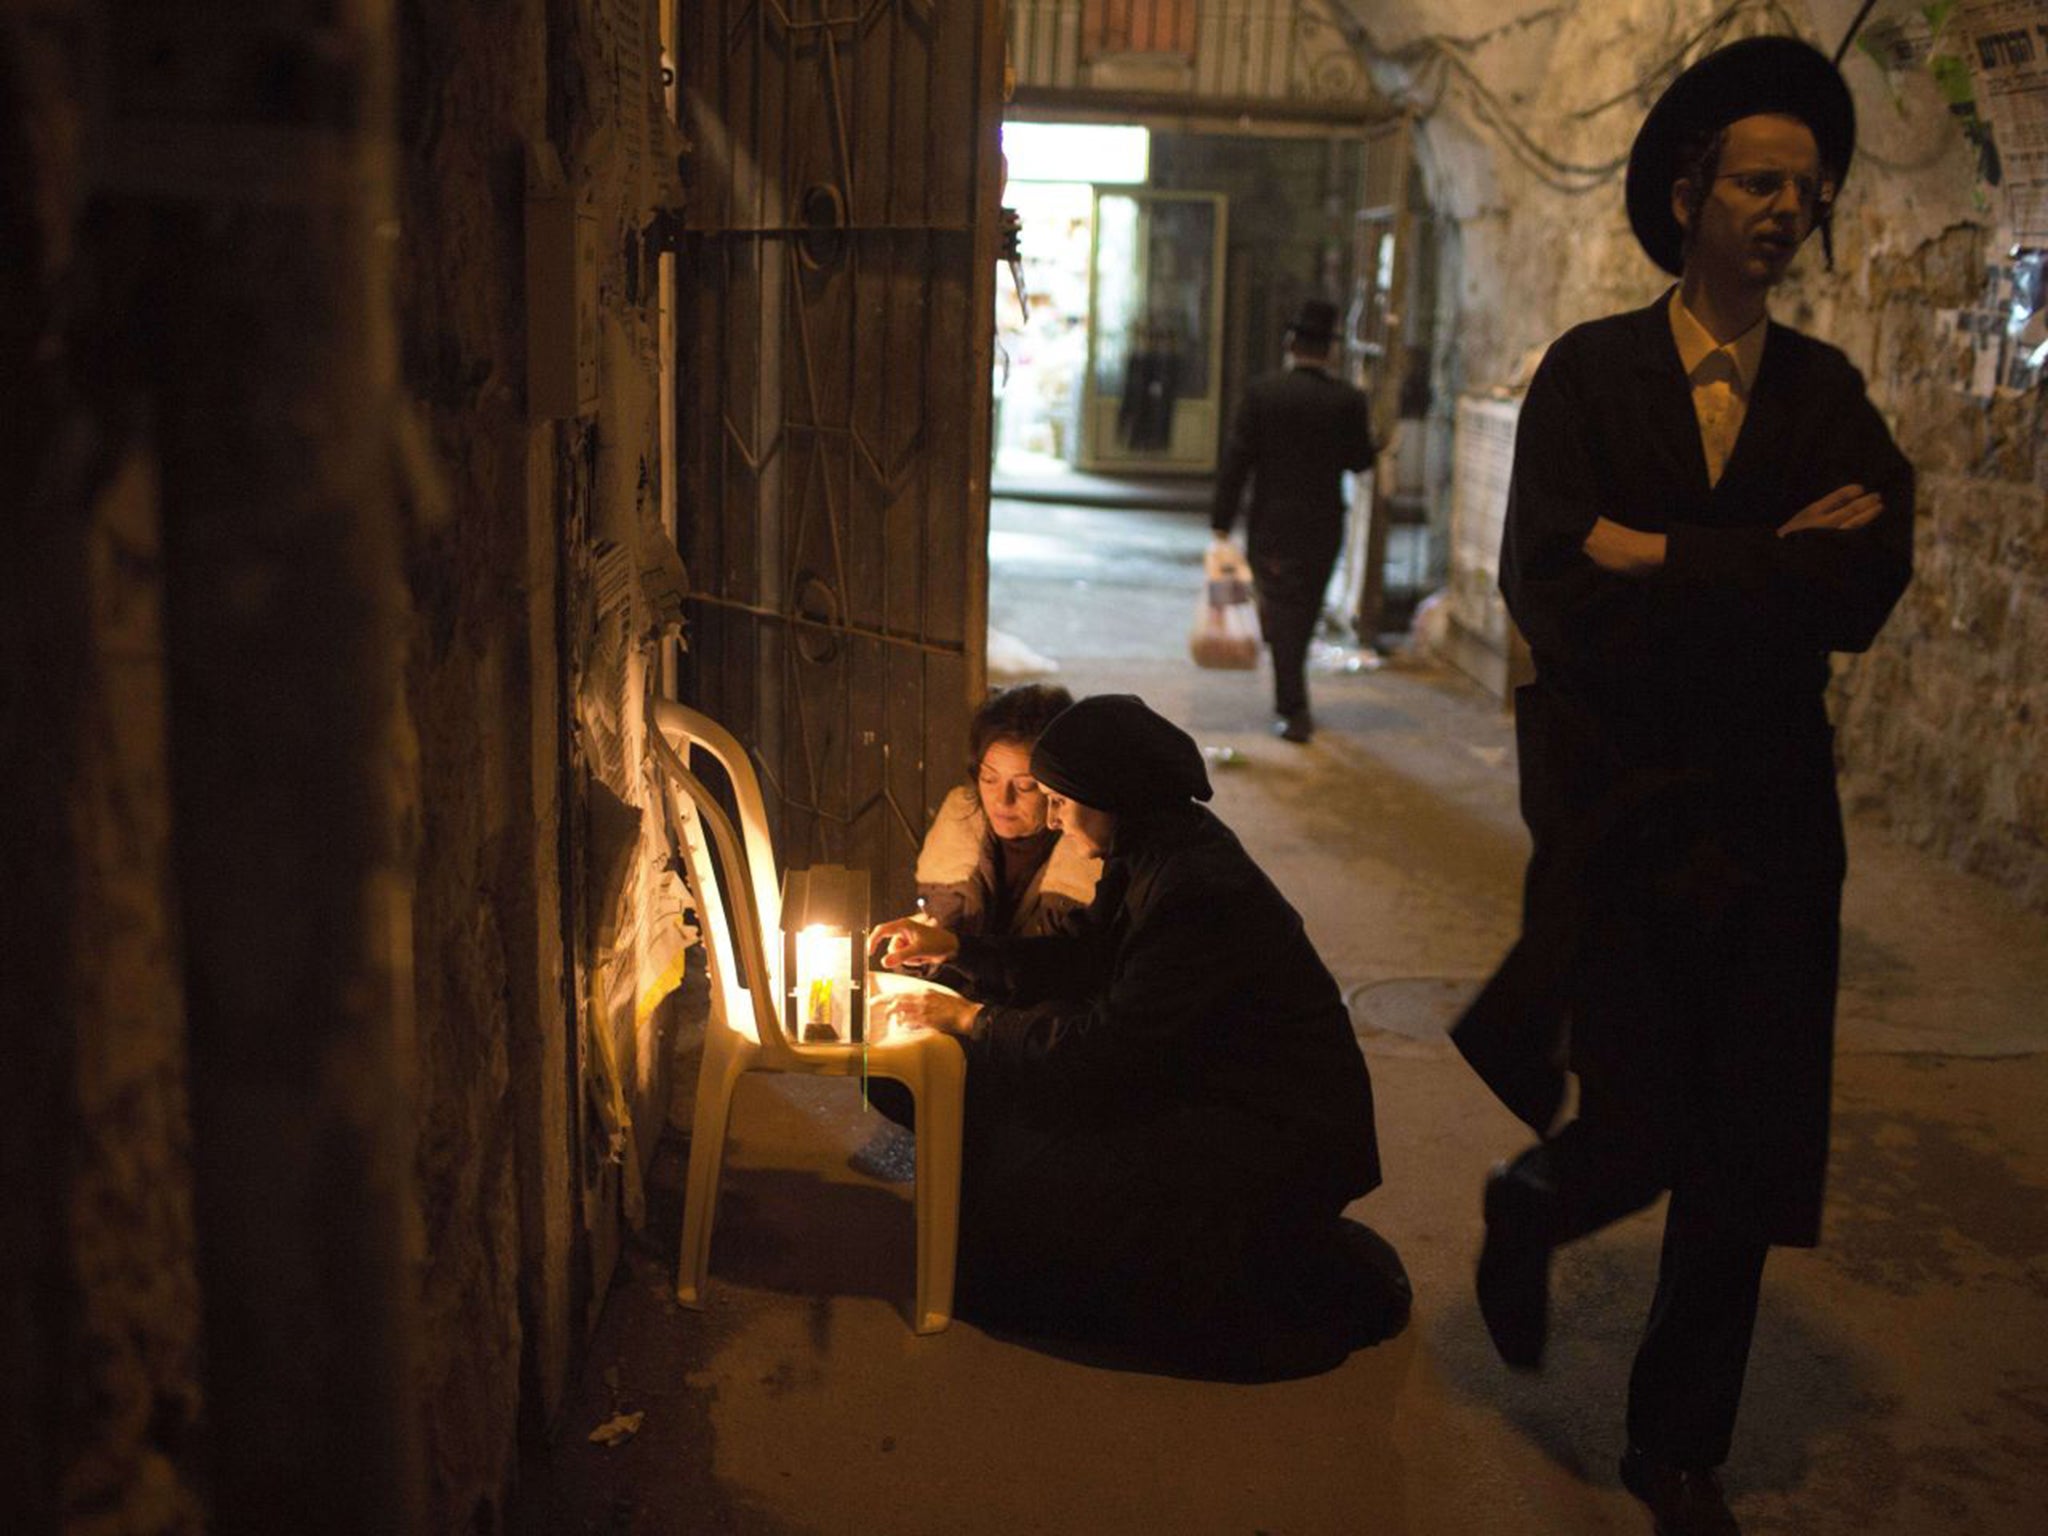 Ultra-Orthodox women are expected to behave and dress modestly (AFP/Getty)